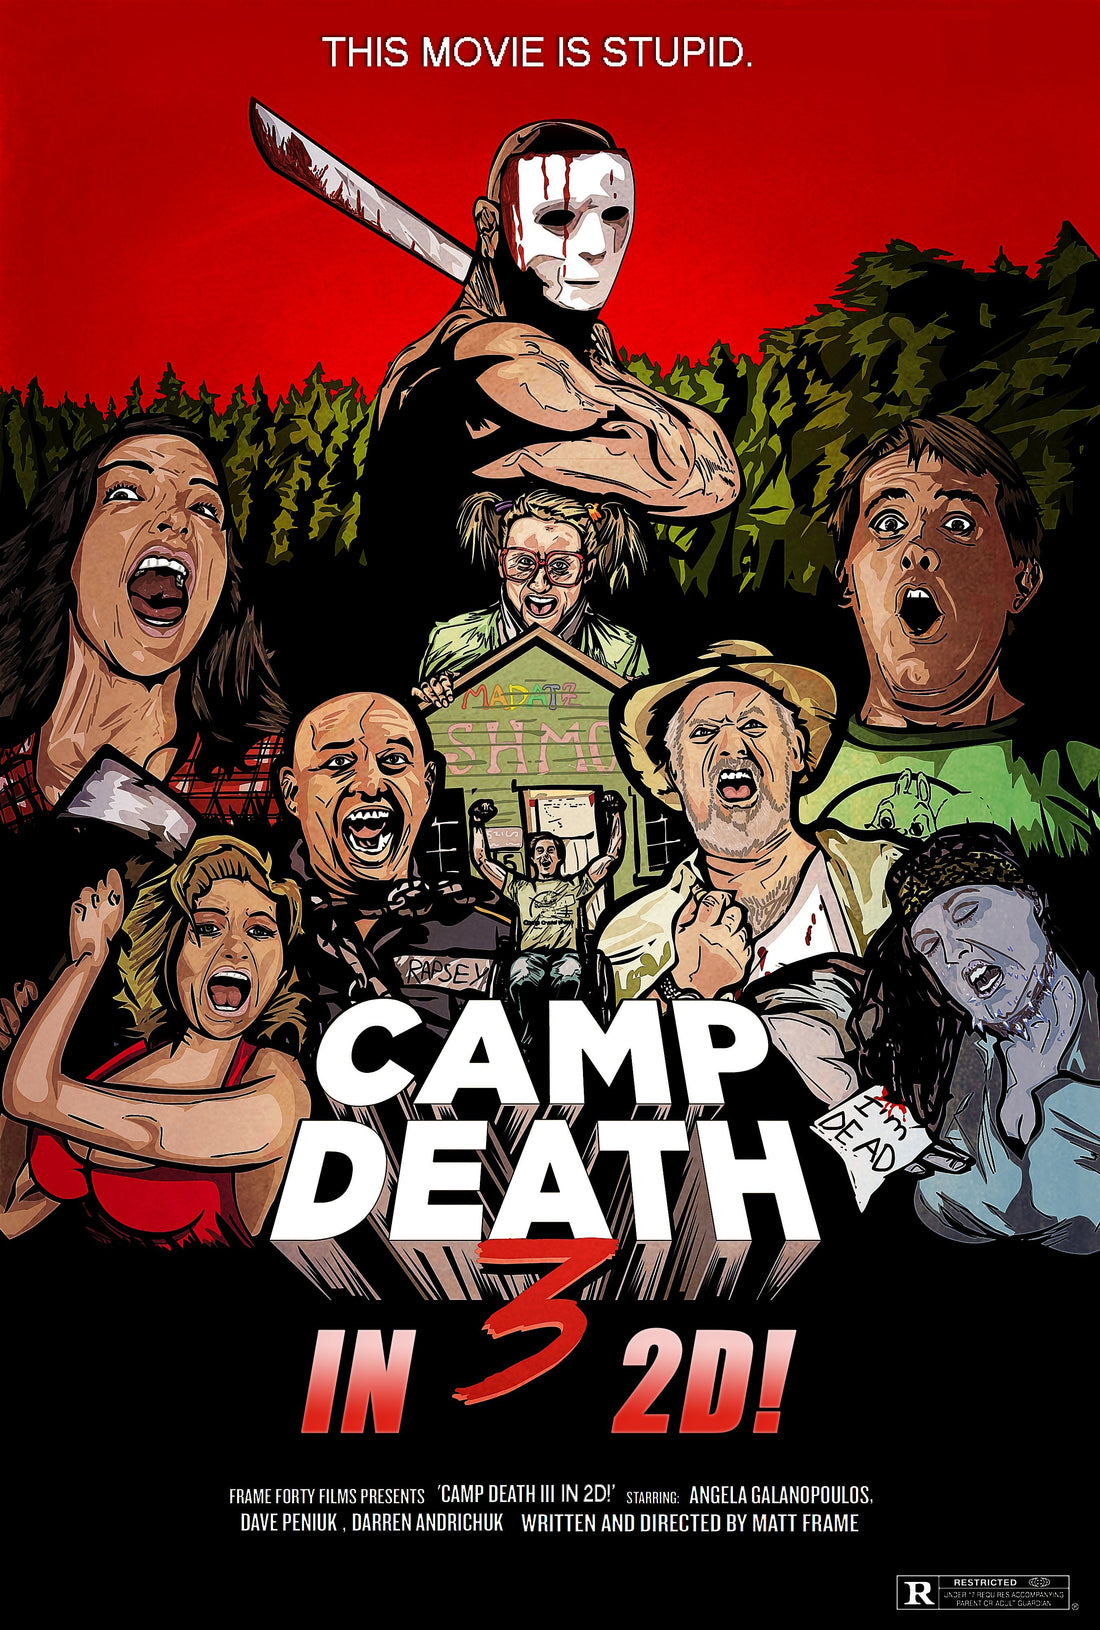 Interview with Matt Frame; Writer/Director/Producer of Camp Death III in 2D!